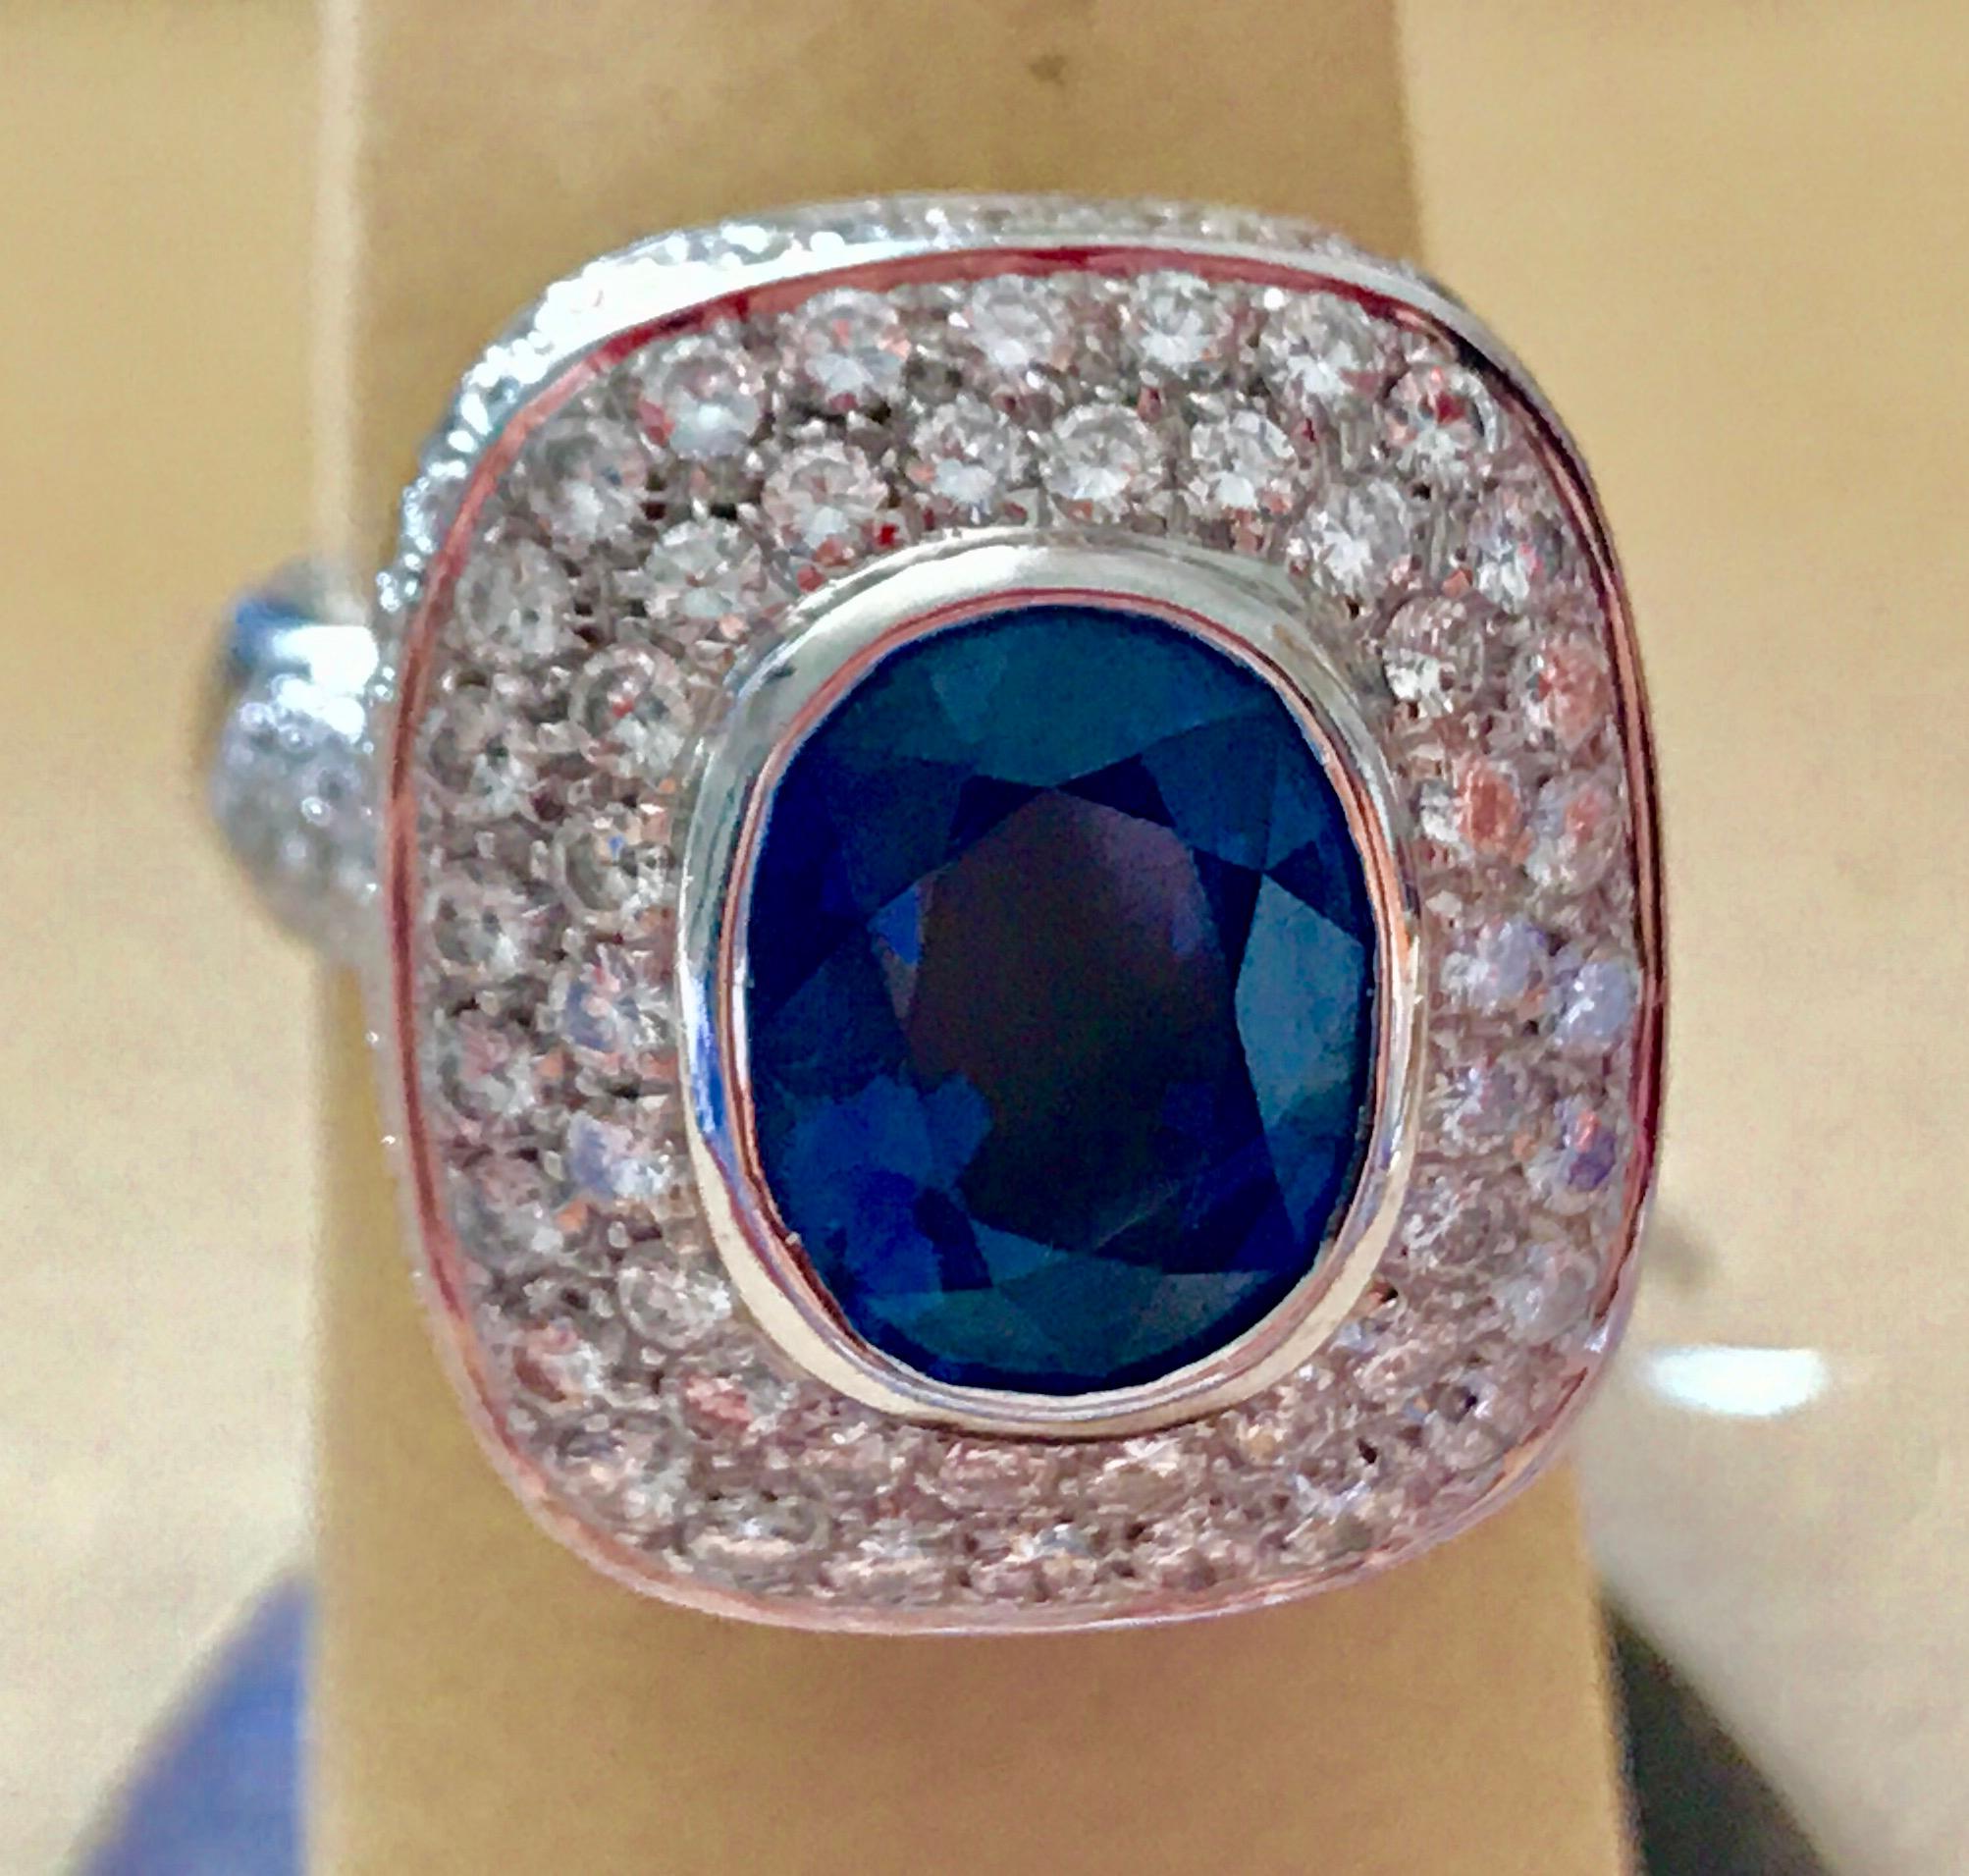 Approximately 4-5 Carat  Ceylon  Blue Sapphire & Diamond 18 Karat  White Gold Cocktail Ring
4-5 Carat of blue Sapphire. This is an estate piece and stone was not take out to weigh the actual weight . The estimated weight is my measurement only.
169